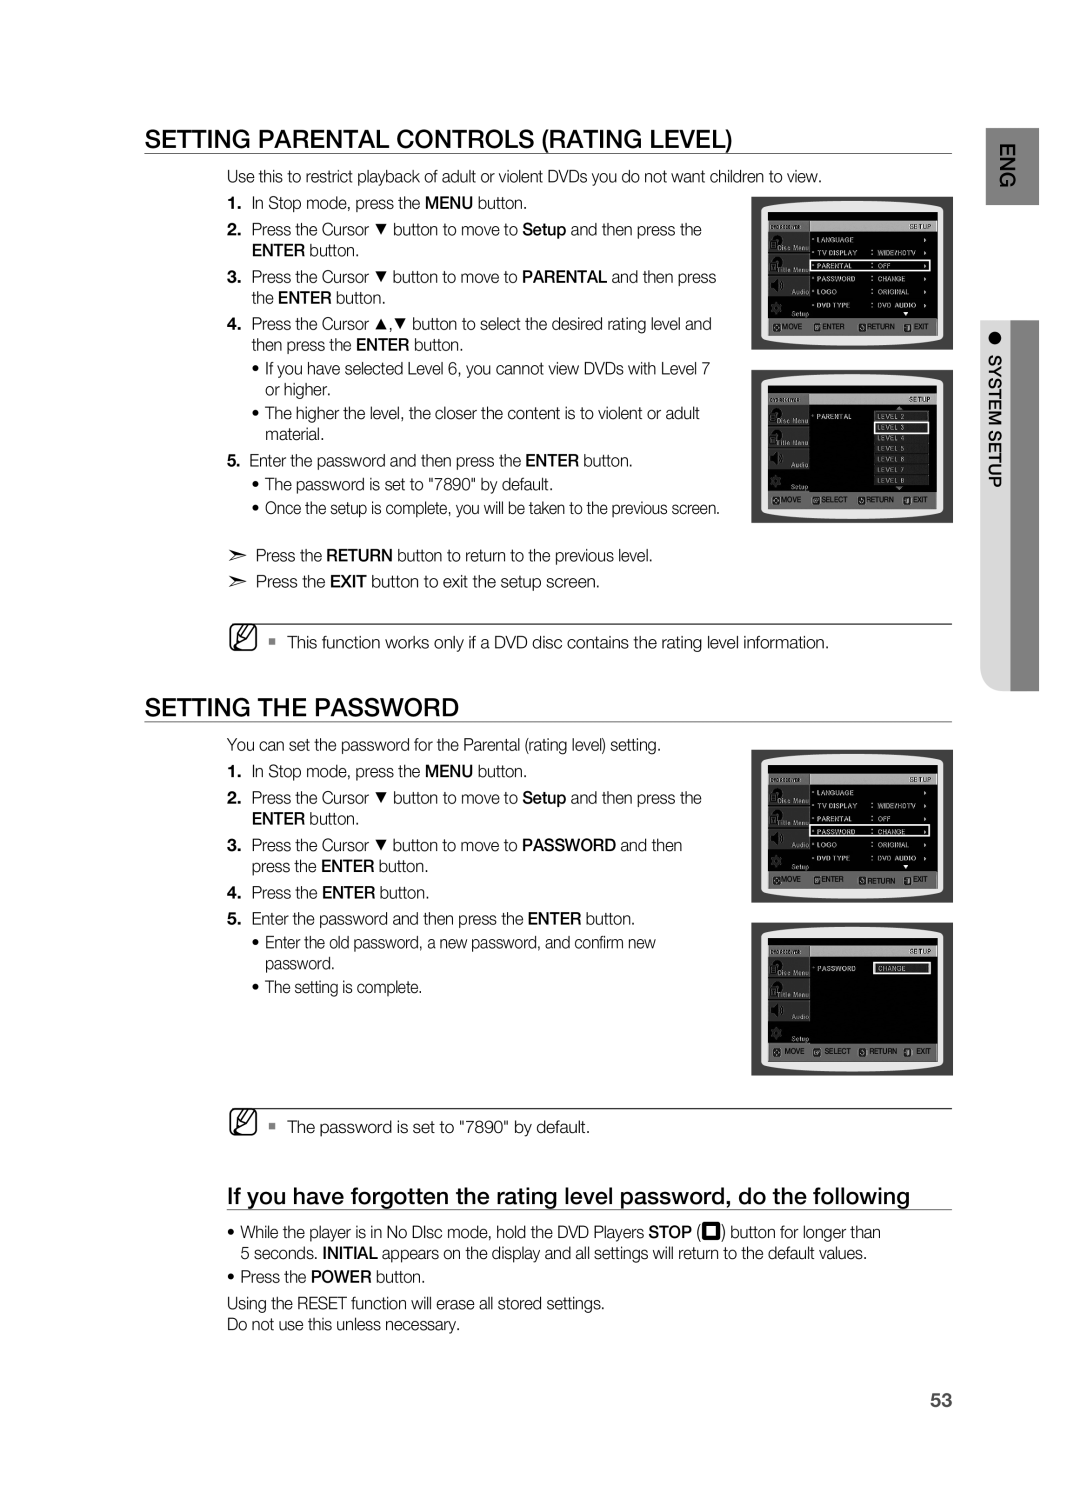 Samsung HT-TWZ415 user manual Setting Parental Controls Rating Level, Setting the Password 